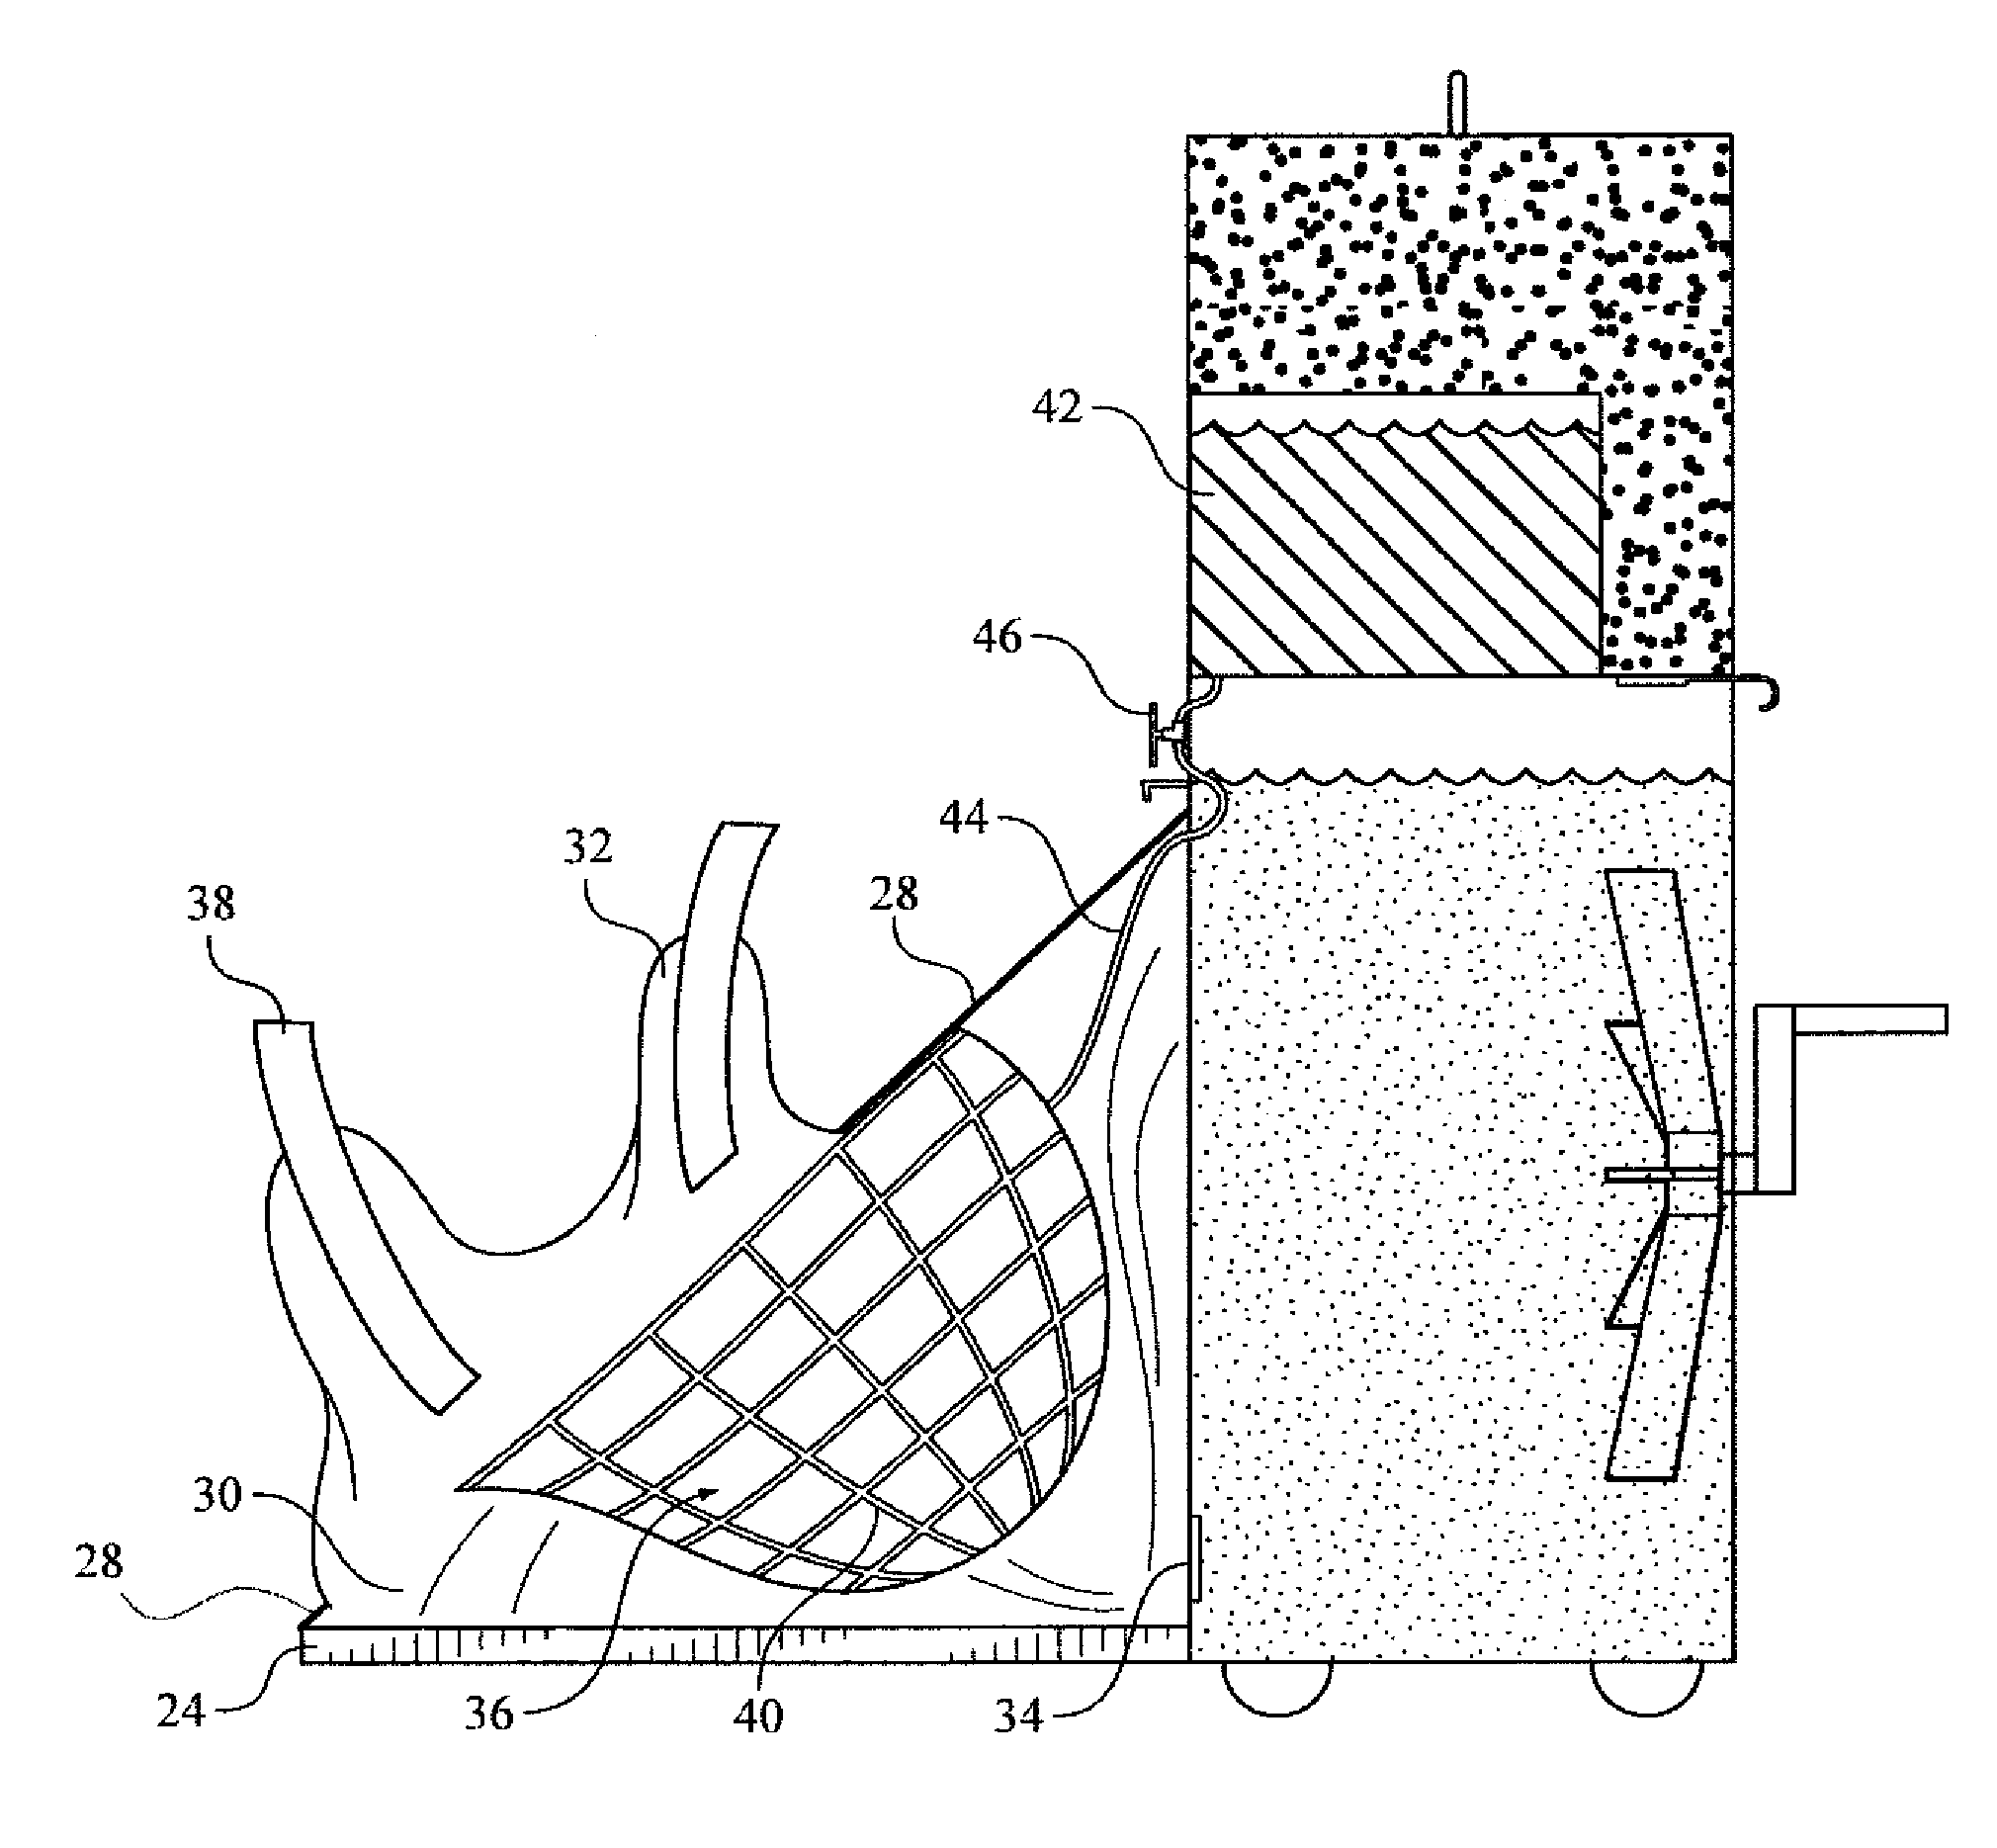 Apparatus and method for preventing brain damage during cardiac arrest, CPR, or severe shock